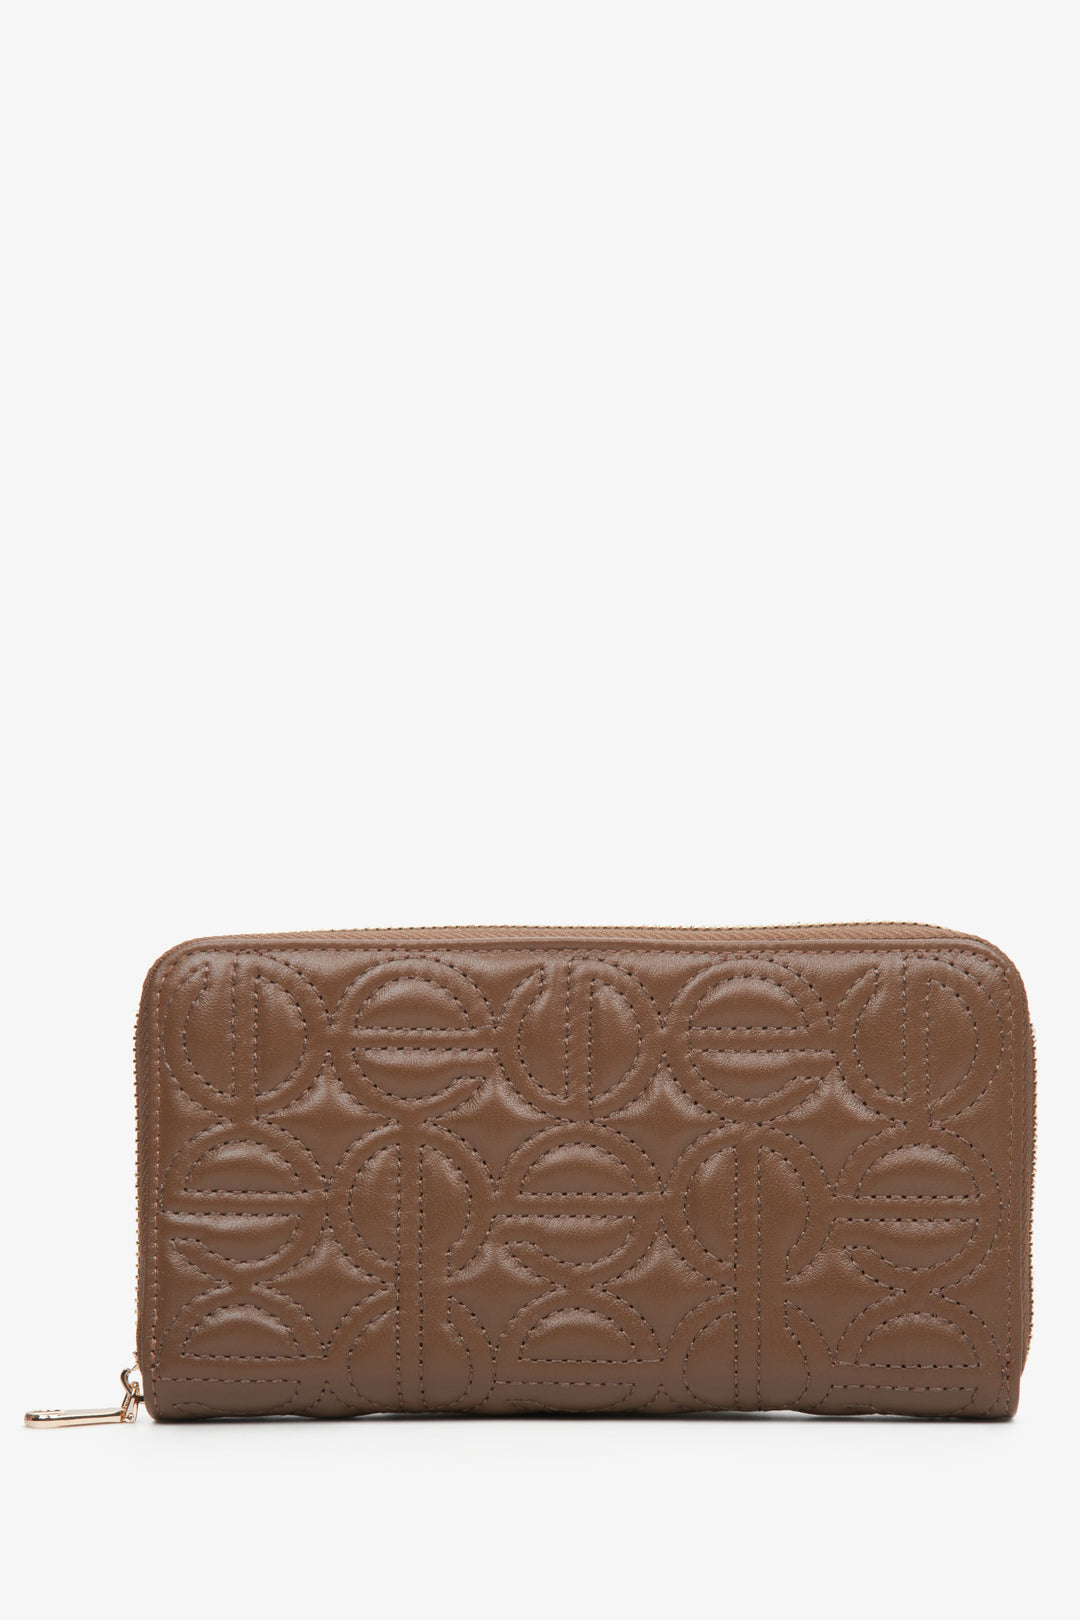 Dark brown leather women's continental wallet with embossed Estro brand logo.